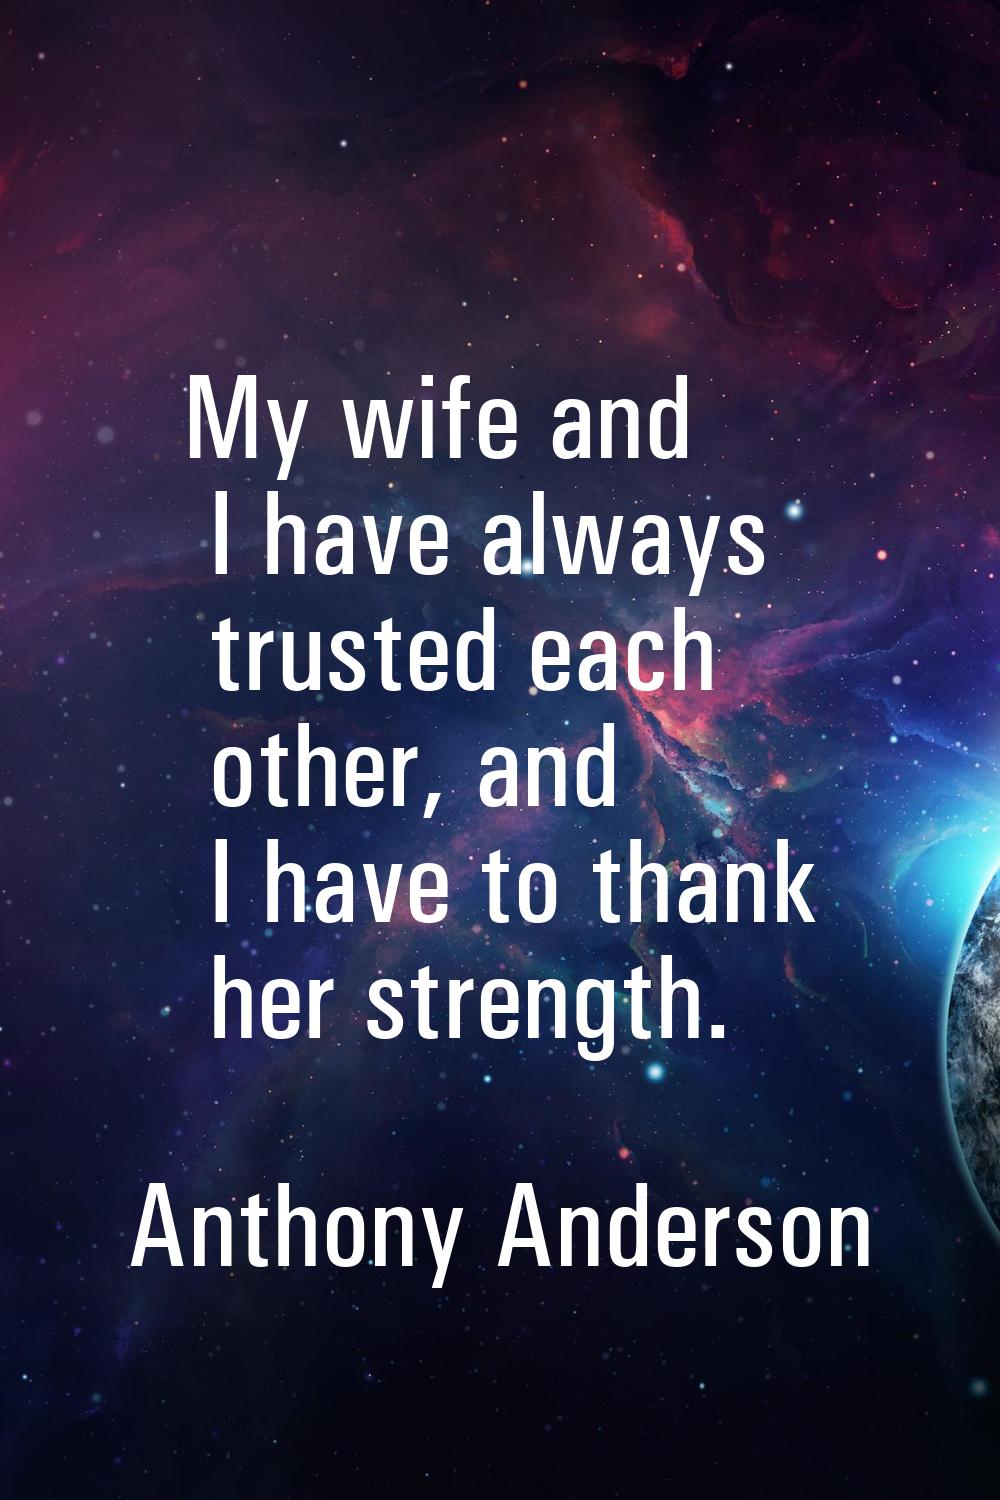 My wife and I have always trusted each other, and I have to thank her strength.